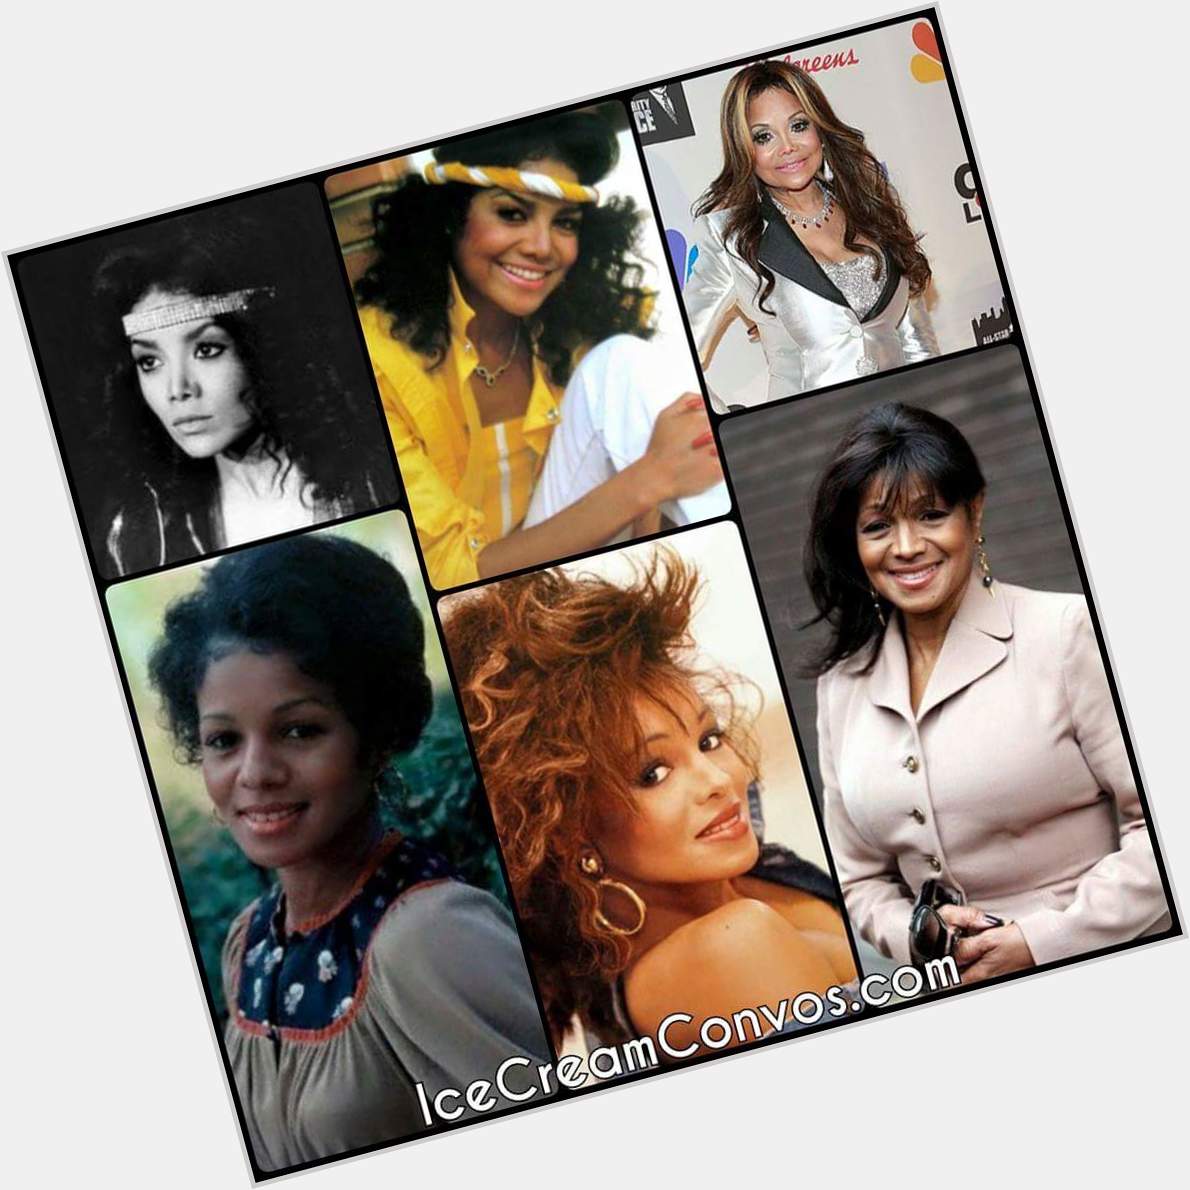 One I was named after and one I should have been   Happy birthday LaToya and Rebbie Jackson!    